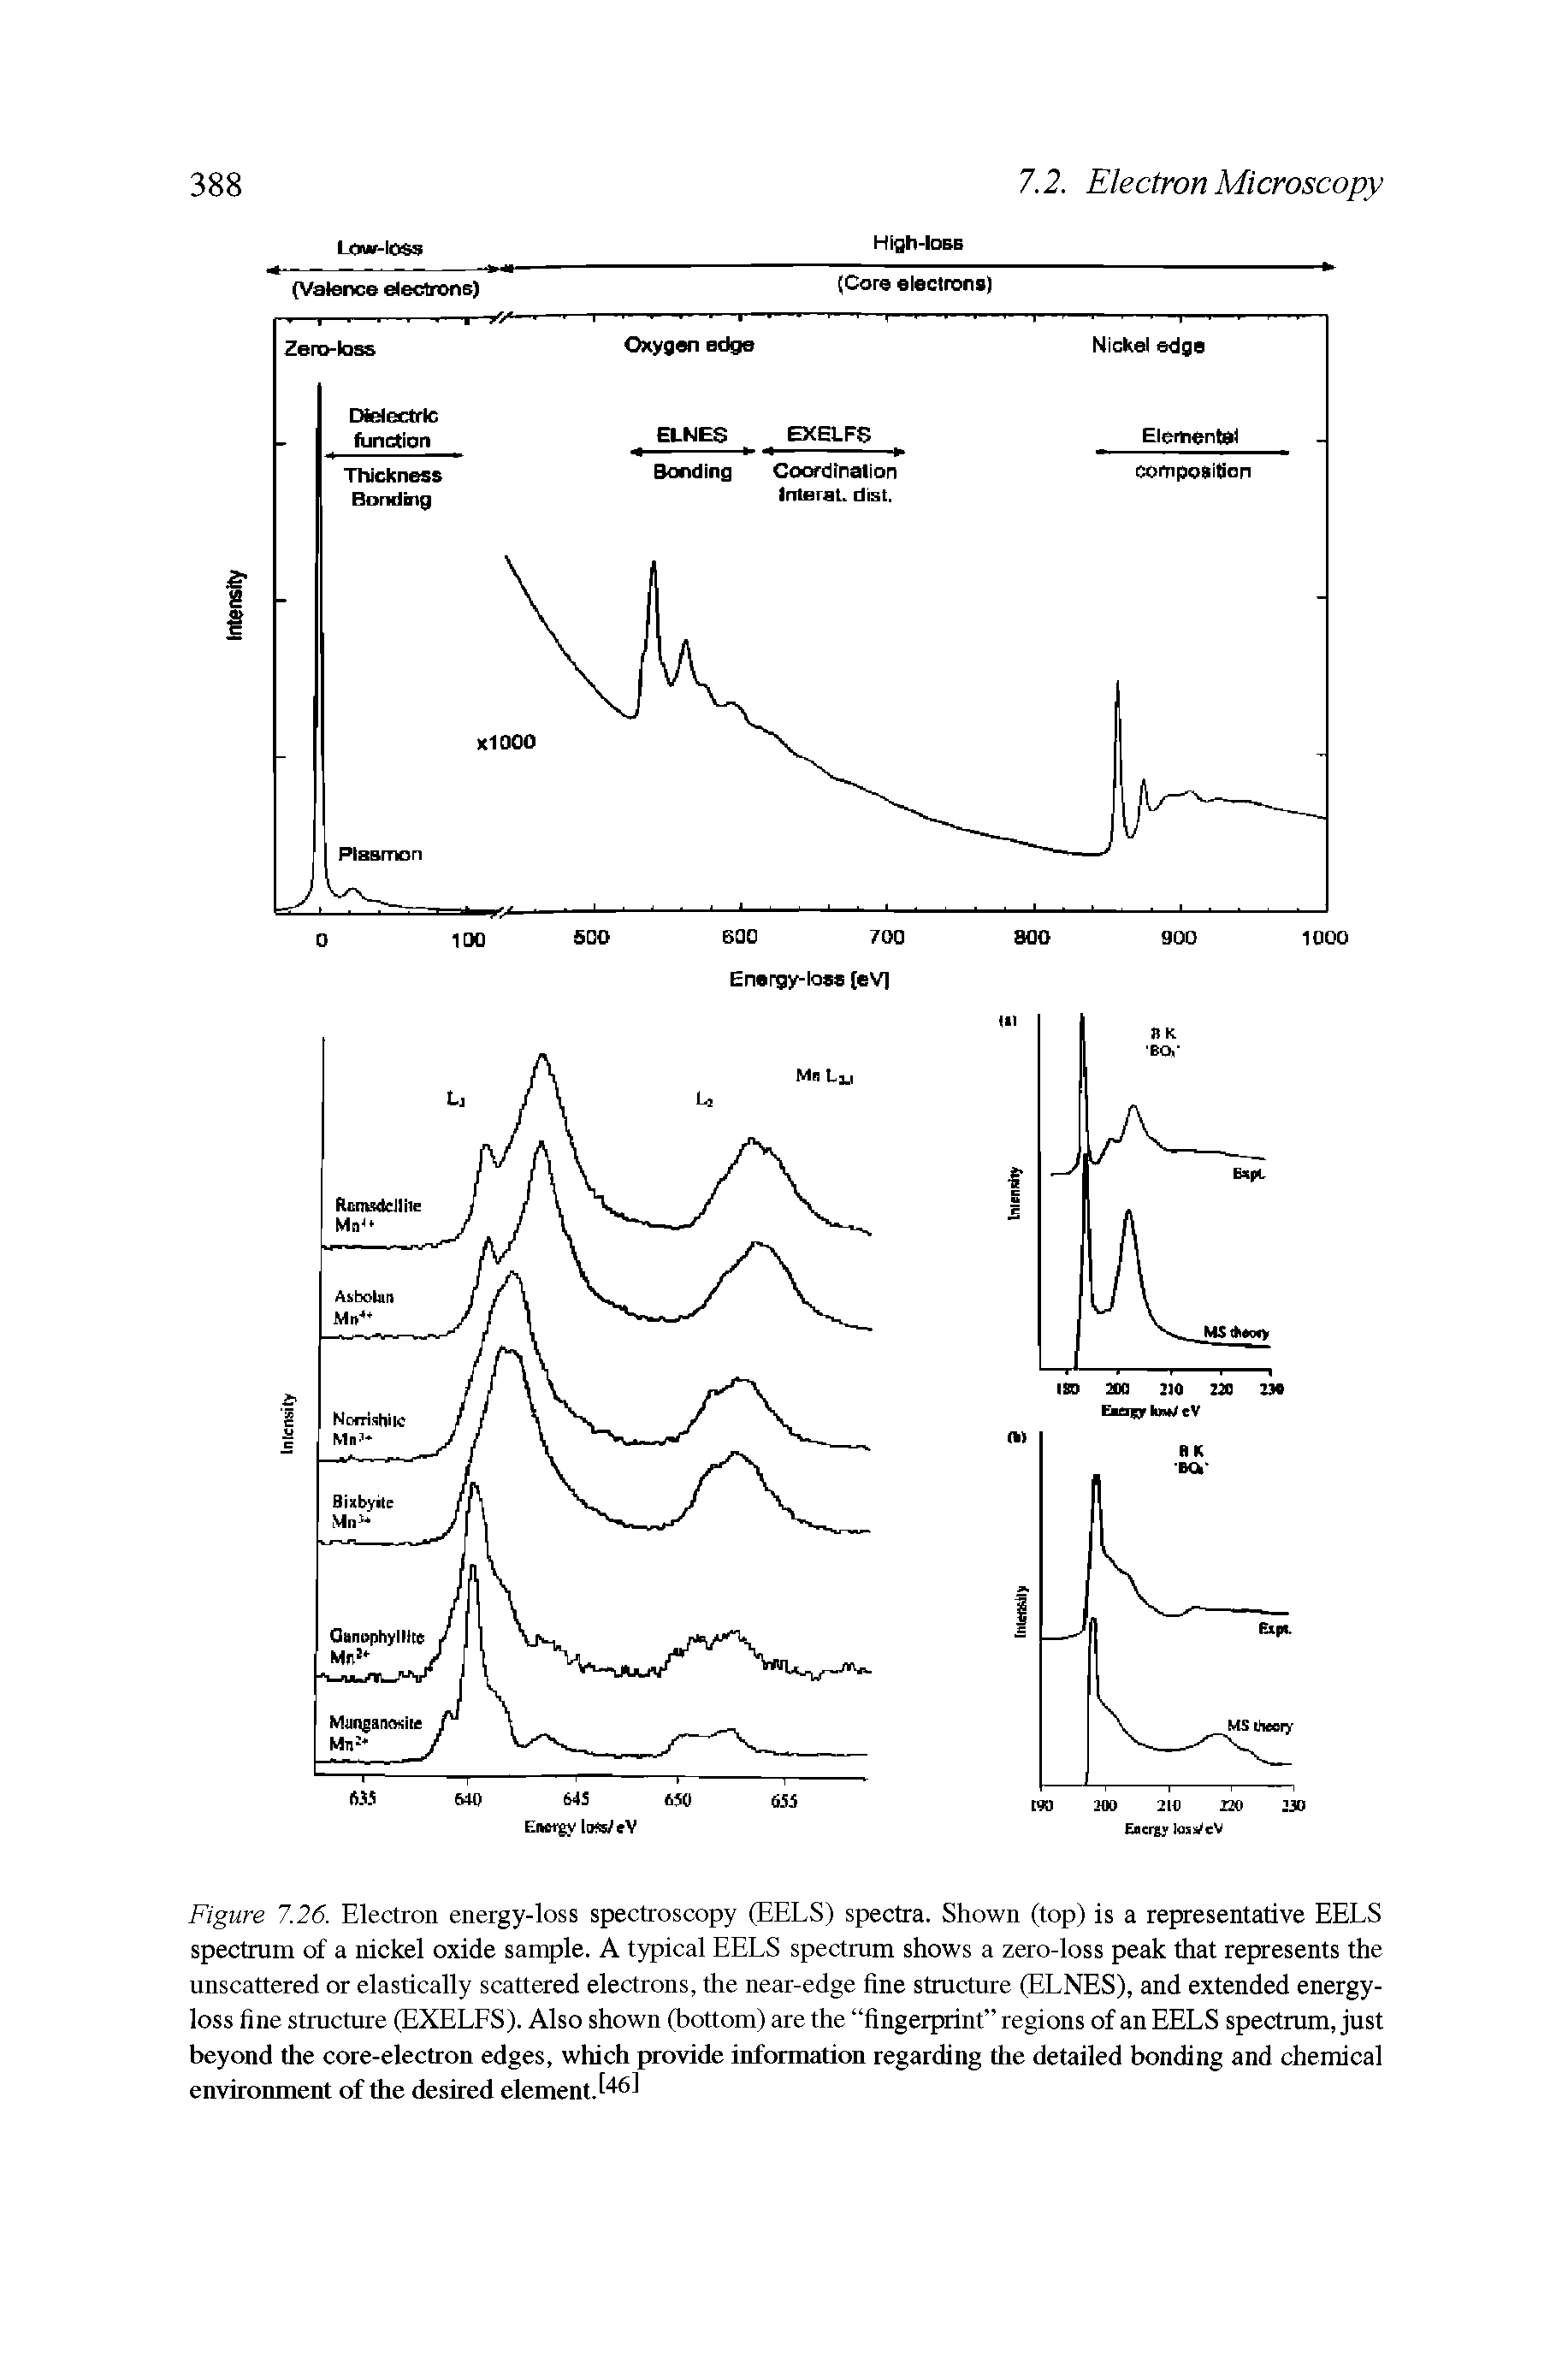 Figure 7.26. Electron energy-loss spectroscopy (EELS) spectra. Shown (top) is a representative EELS spectrum of a nickel oxide sample. A typical EELS spectrum shows a zero-loss peak that represents the unscattered or elastically scattered electrons, the near-edge fine structure (ELNES), and extended energy-loss fine structure (EXELFS). Also shown (bottom) are the fingerprint regions of an EELS spectrum, just beyond the core-electron edges, which provide information regarding the detailed bonding and chemical environment of the desired element.